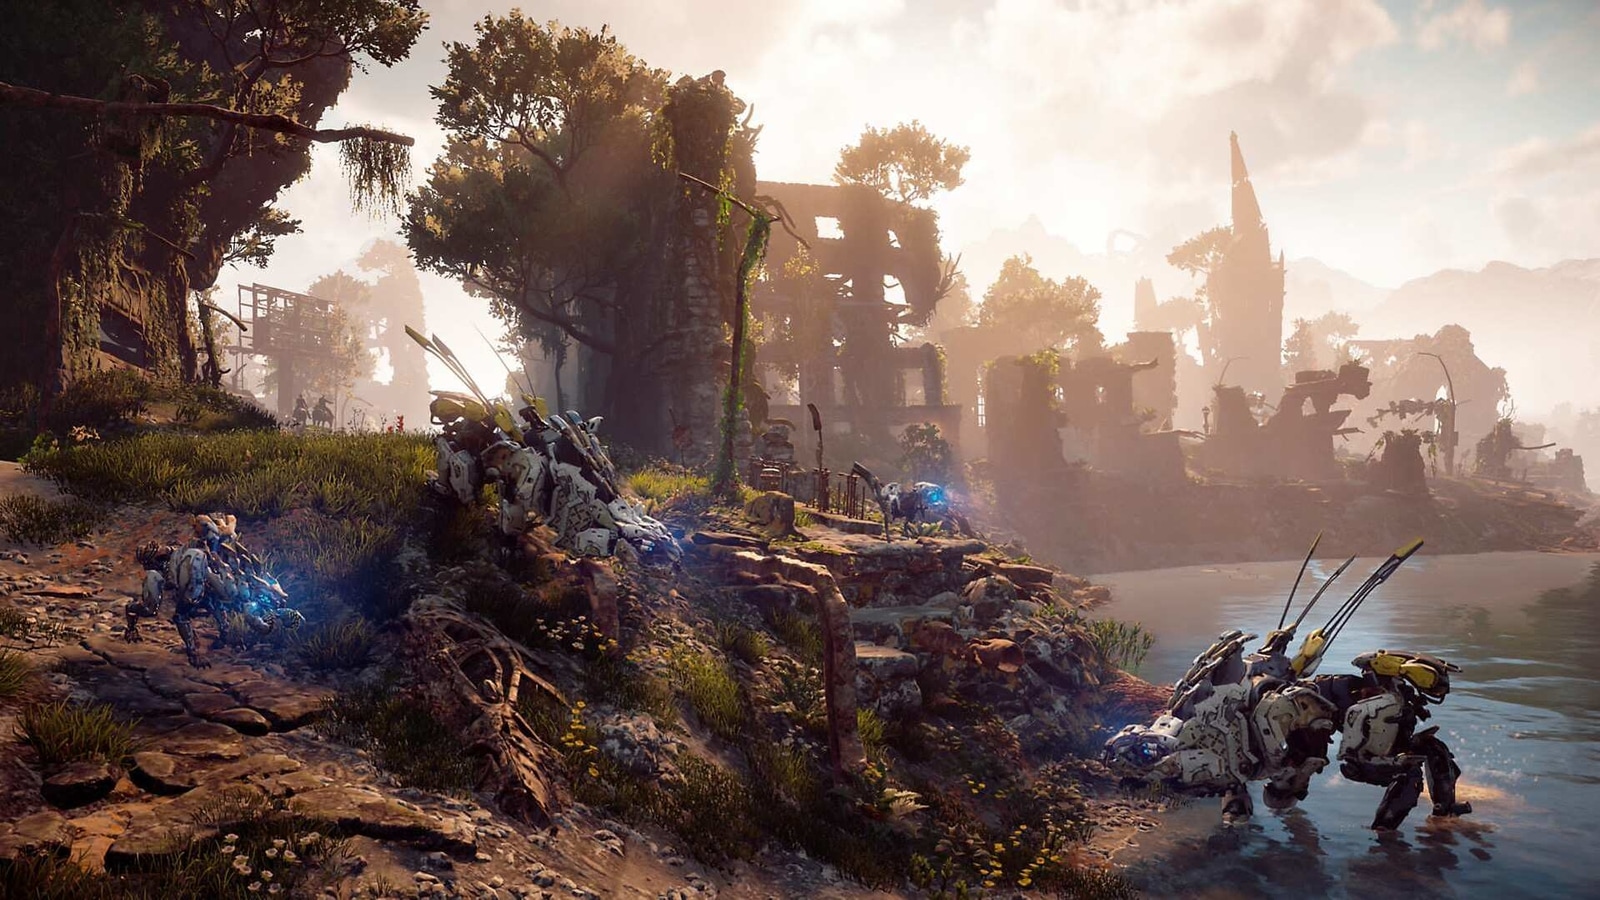 Horizon Zero Dawn goes from being a PS4 exclusive to a best-seller on  Steam, horizon zero dawn 